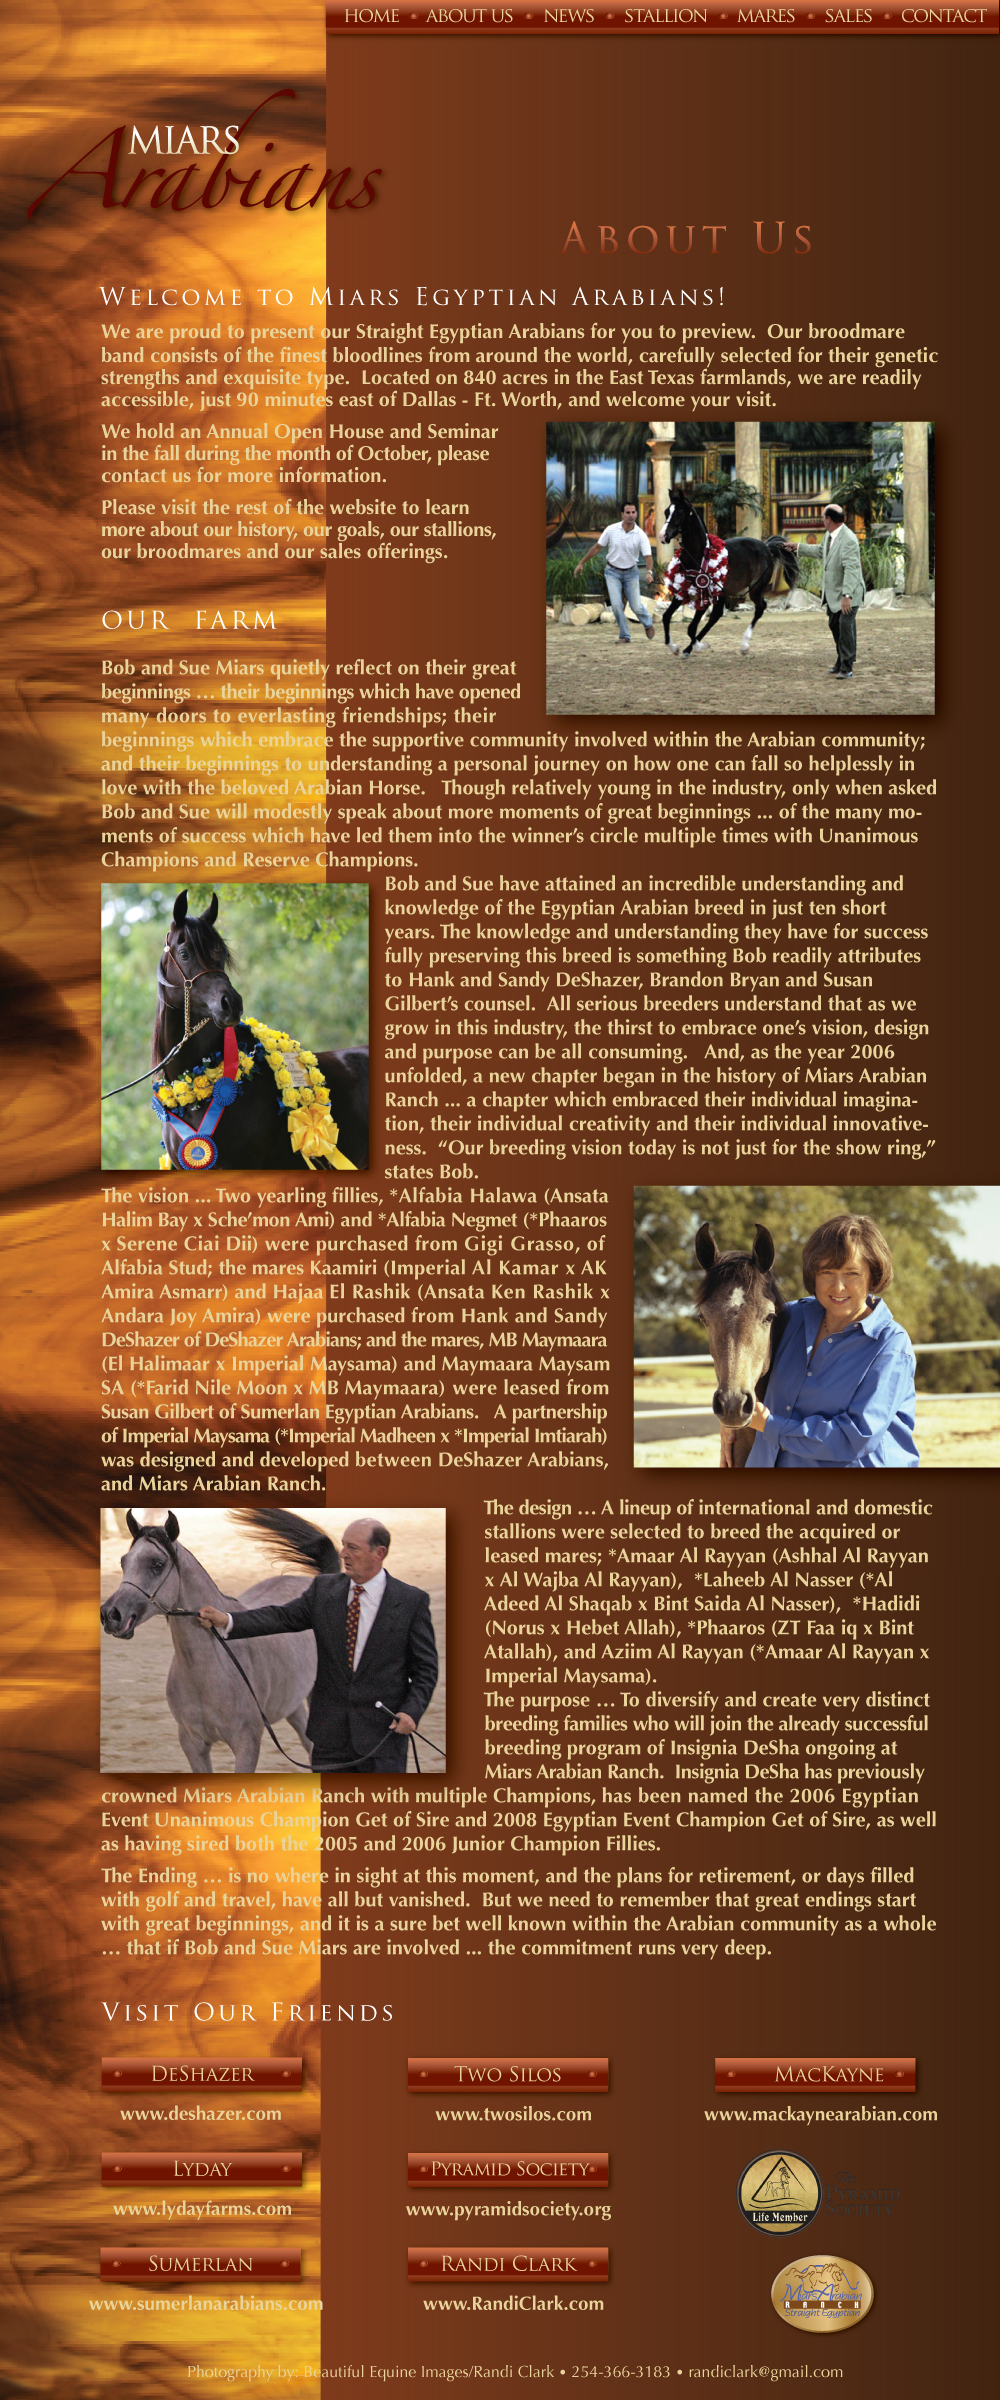 Welcome to Miars Egyptian Arabians! We are proud to present our Straight Egyptian Arabians for you to preview. Our broodmare band consists of the finest bloodlines from around the world, carefully selected for their genetic strengths and exquisite type. Located on 840 acres in the East Texas farmlands, we are readily accessible, just 90 minutes east of Dallas – Ft. Worth, and welcome your visit. We hold an Annual Open House and Seminar in the fall during the month of October, please contact us for more information. Please visit the rest of the website to learn more about our history, our goals our stallions, our broodmares and our sales offerings.  Our Farm – Bob and Sue Miars quietly reflect on their great beginnings...their beginnings which have opened many doors to everlasting friendships; their beginnings which embrace the supportive community involved within the Arabian community; and their beginnings to understanding a person journey on how one can fall so helplessly in love with the beloved Arabian Horse. Though relatively young in the industry, only when asked Bob and Sue will modestly speak about more moments of great beginnings...of the many moments of success which have led them into the winner’s circle multiple times with Unanimous Champions, Champions and Reserve Champions. Bob and Sue have attained an incredible understanding and knowledge of the Egyptian Arabian breed in just ten short years. The knowledge and understanding they have for success fully preserving this breed is something Bob readily attributes to Hank and Sandy DeShazer’s, Brandon Bryan and Susan Gilbert counsel. All serious breeders understand that as we grow in this industry, the thirst to embrace one’s vision, design and purpose can be all consuming. And, as the year 2006 unfolded, a new chapter began in the history of Miars Arabian Ranch...a chapter which embraced their individual imagination, their individual creativity and their individual innovativeness. “Our breeding vision today is not just for the show ring,” states Bob. The vision...Two yearling fillies, *Alfabia Halawa (Ansata Halim Bay x Sche’mon Ami) and *Alfabia Negmet (*Phaaros x Serene Ciai Dii) were purchased from Gigi Grasso, of Alfabia Stud; the mares Kaamiri (Imperial Al Kamar x AK Amira Asmarr) and Hajaa El Rashik (Ansata Ken Rashik x Andara Joy Amira) were purchased from Hand and Sandy DeShazer of DeShazer Arabians; and the mares, MB Maymaara (El Halimaar x Imperial Maysama) and Maymaara Maysam SA (*Farid Nile Moon x MB Maymaara) were leased from Susan Gilbert of Sumerlan Egyptian Arabians. A partnership of Imperial Maysama (*Imperial Madheen x *Imperial Imtiarah) was designed and developed between DeShazer Arabians, and Miars Arabian Ranch. The design...A lineup of international and domestic stallions were selected to breed the acquired or leased mares; *Amaar Al Rayyan (Ashhal Al Rayyan x Al Wajba Al Rayyan), *Laheeb Al Nasser (*Al Adeed Al Shaqab x Bint Saida Al Nasser),  *Hadidi (Norus x Hebet Allah), *Phaaros  (ZT faa iq x Bint Atallah), and Aziim Al Rayyan (*Amaar Al Rayyan x Imperial Maysama). The purpose...To diversify and create very distinct breeding families who will join the already successful breeding program of Insignia DeSha ongoing at Miars Arabian Ranch, Insignia DeSha has previously crowned Miars Arabian Ranch with multiple Champions, has been named the 2006 Egyptian Event Unanimous Chmpion Get of Sire and 2008 Egyptian Event Champion Get of Sire, as well as having sired both the 2005 and 2006 Junior Champion Fillies. The Ending...is no where in sight at this moment, and the plans for retirement, or days filled with golf and travel, have all but vanished. But we need to remember that great endings start with great beginnings, and it is a sure bet well known within the Arabian community as a whole...that if Bob and Sue Miars are involved...the commitment runs very deep.